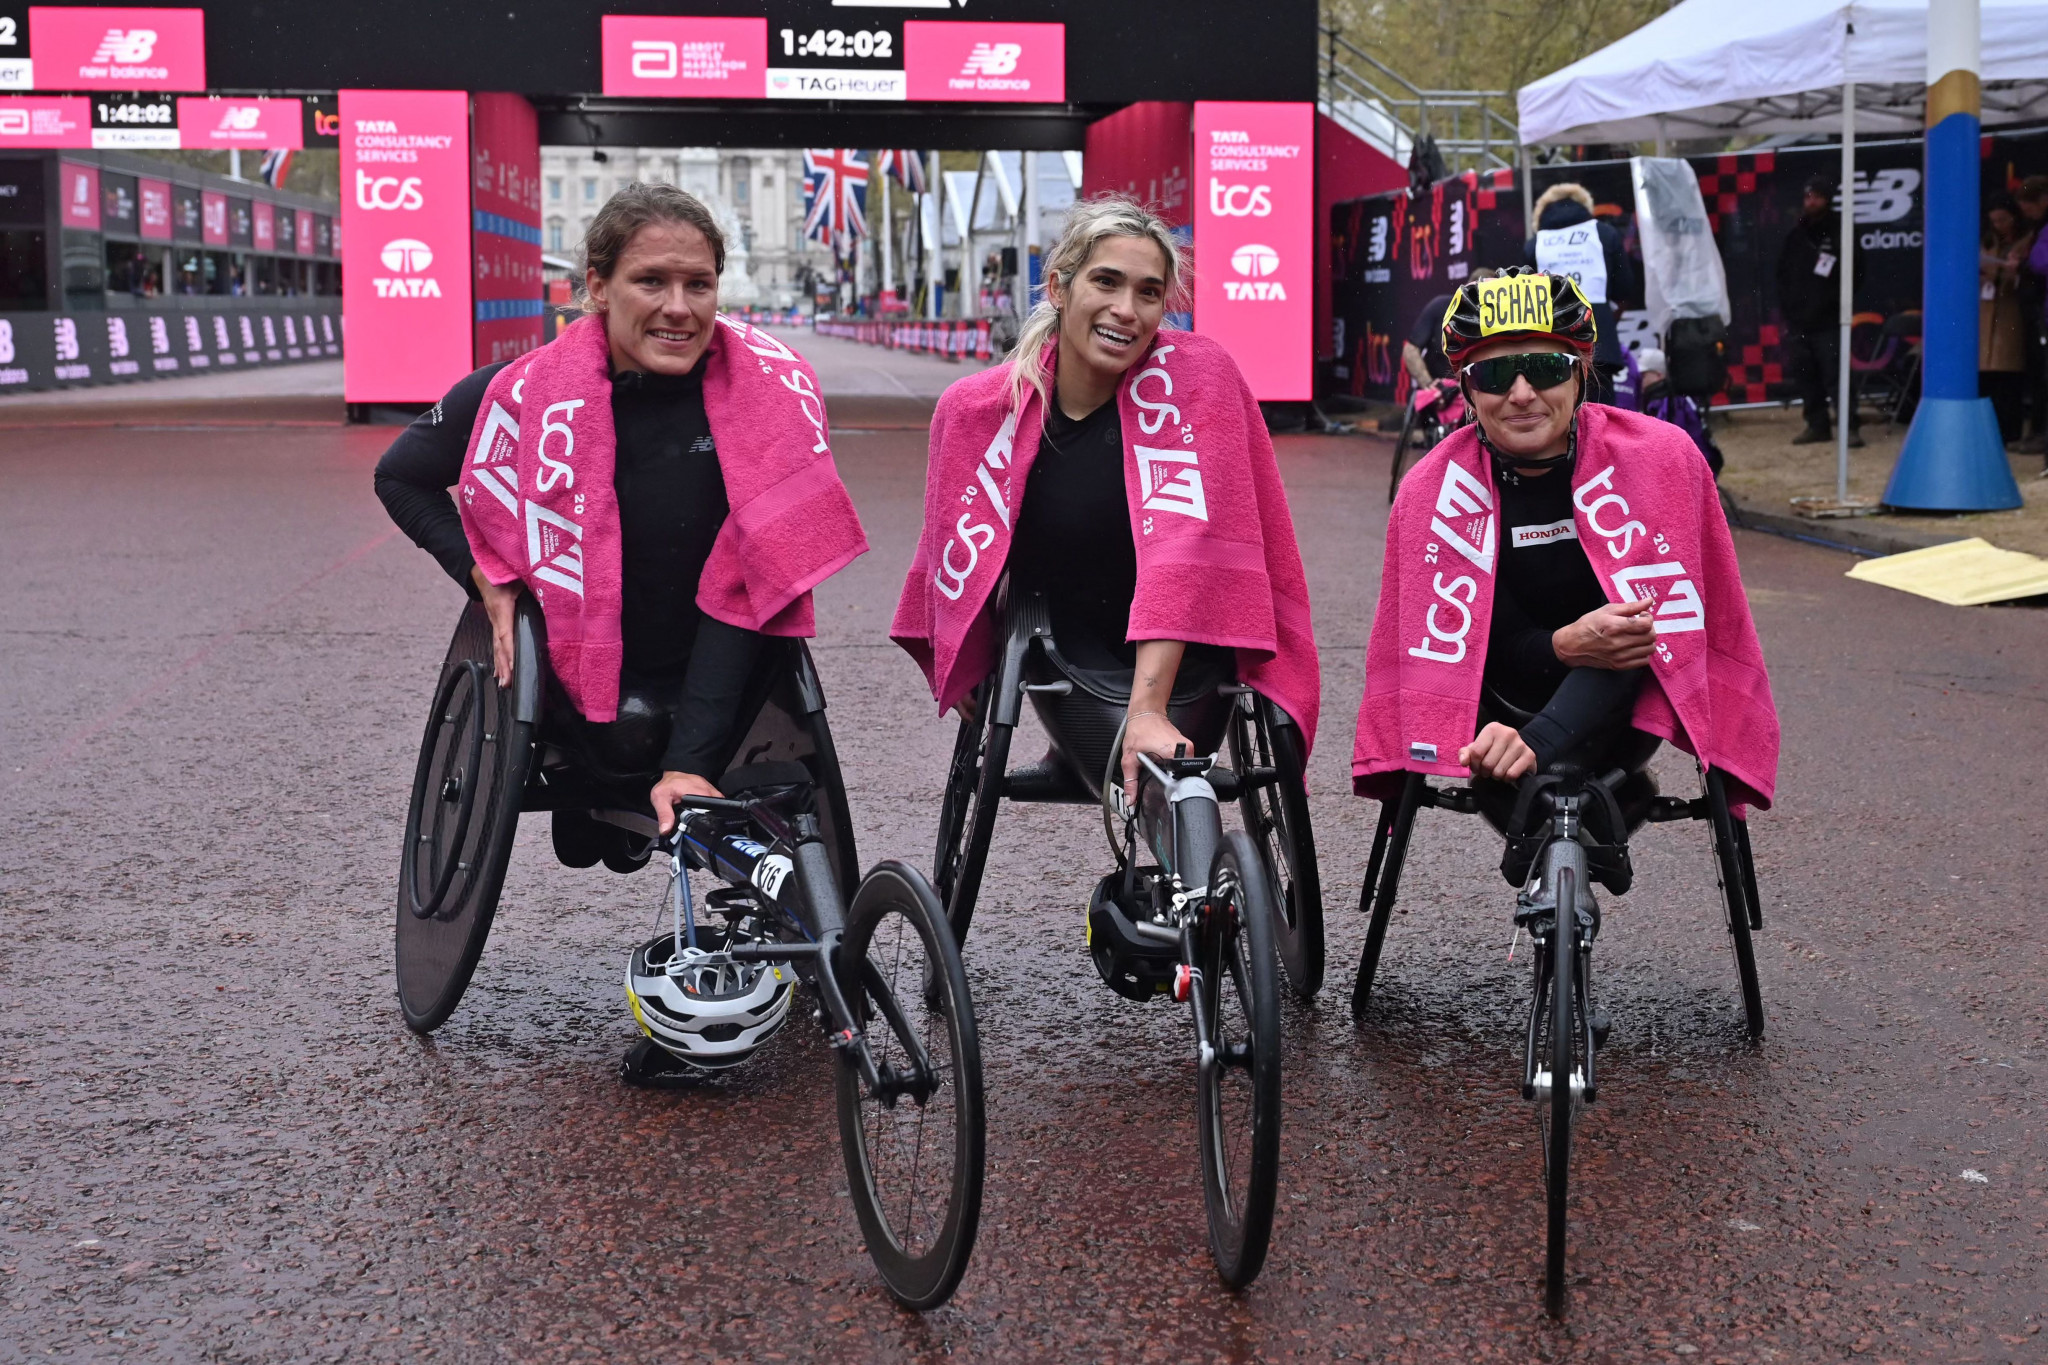 The top three in the women's wheelchair race - from left Catherine Debrunner, who was third, winner Madison de Rozario and Manuela Schar, who was second ©Getty Images